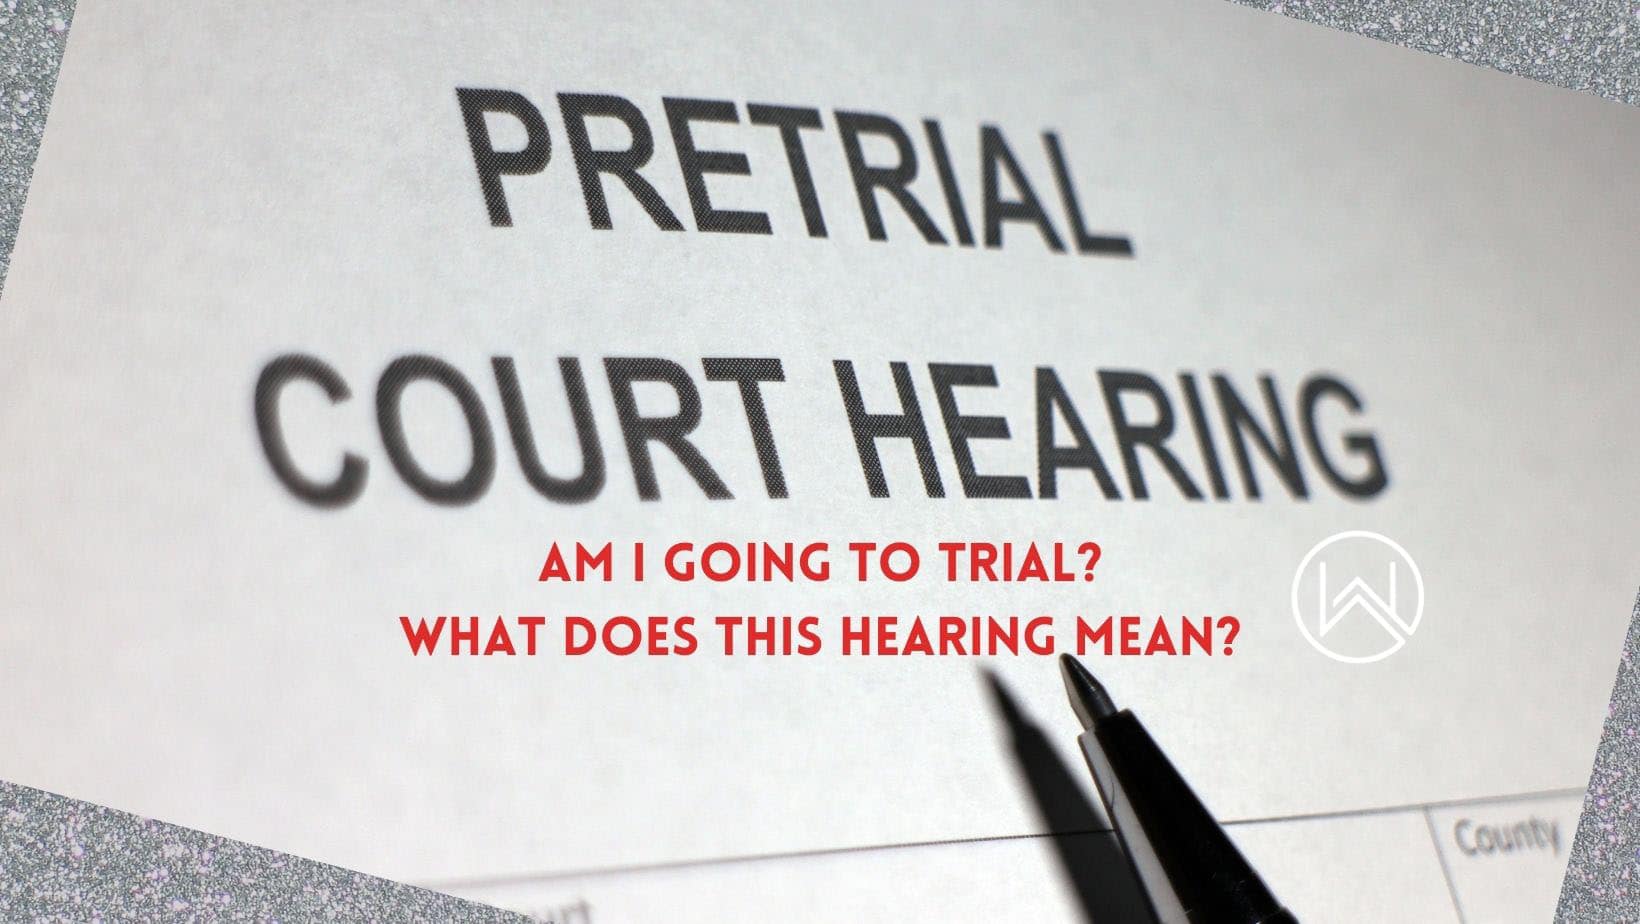 Pretrial court hearing. Am I going to trial? what does this hearing mean? Kitsap Criminal Defense Attorney Jennifer Witt